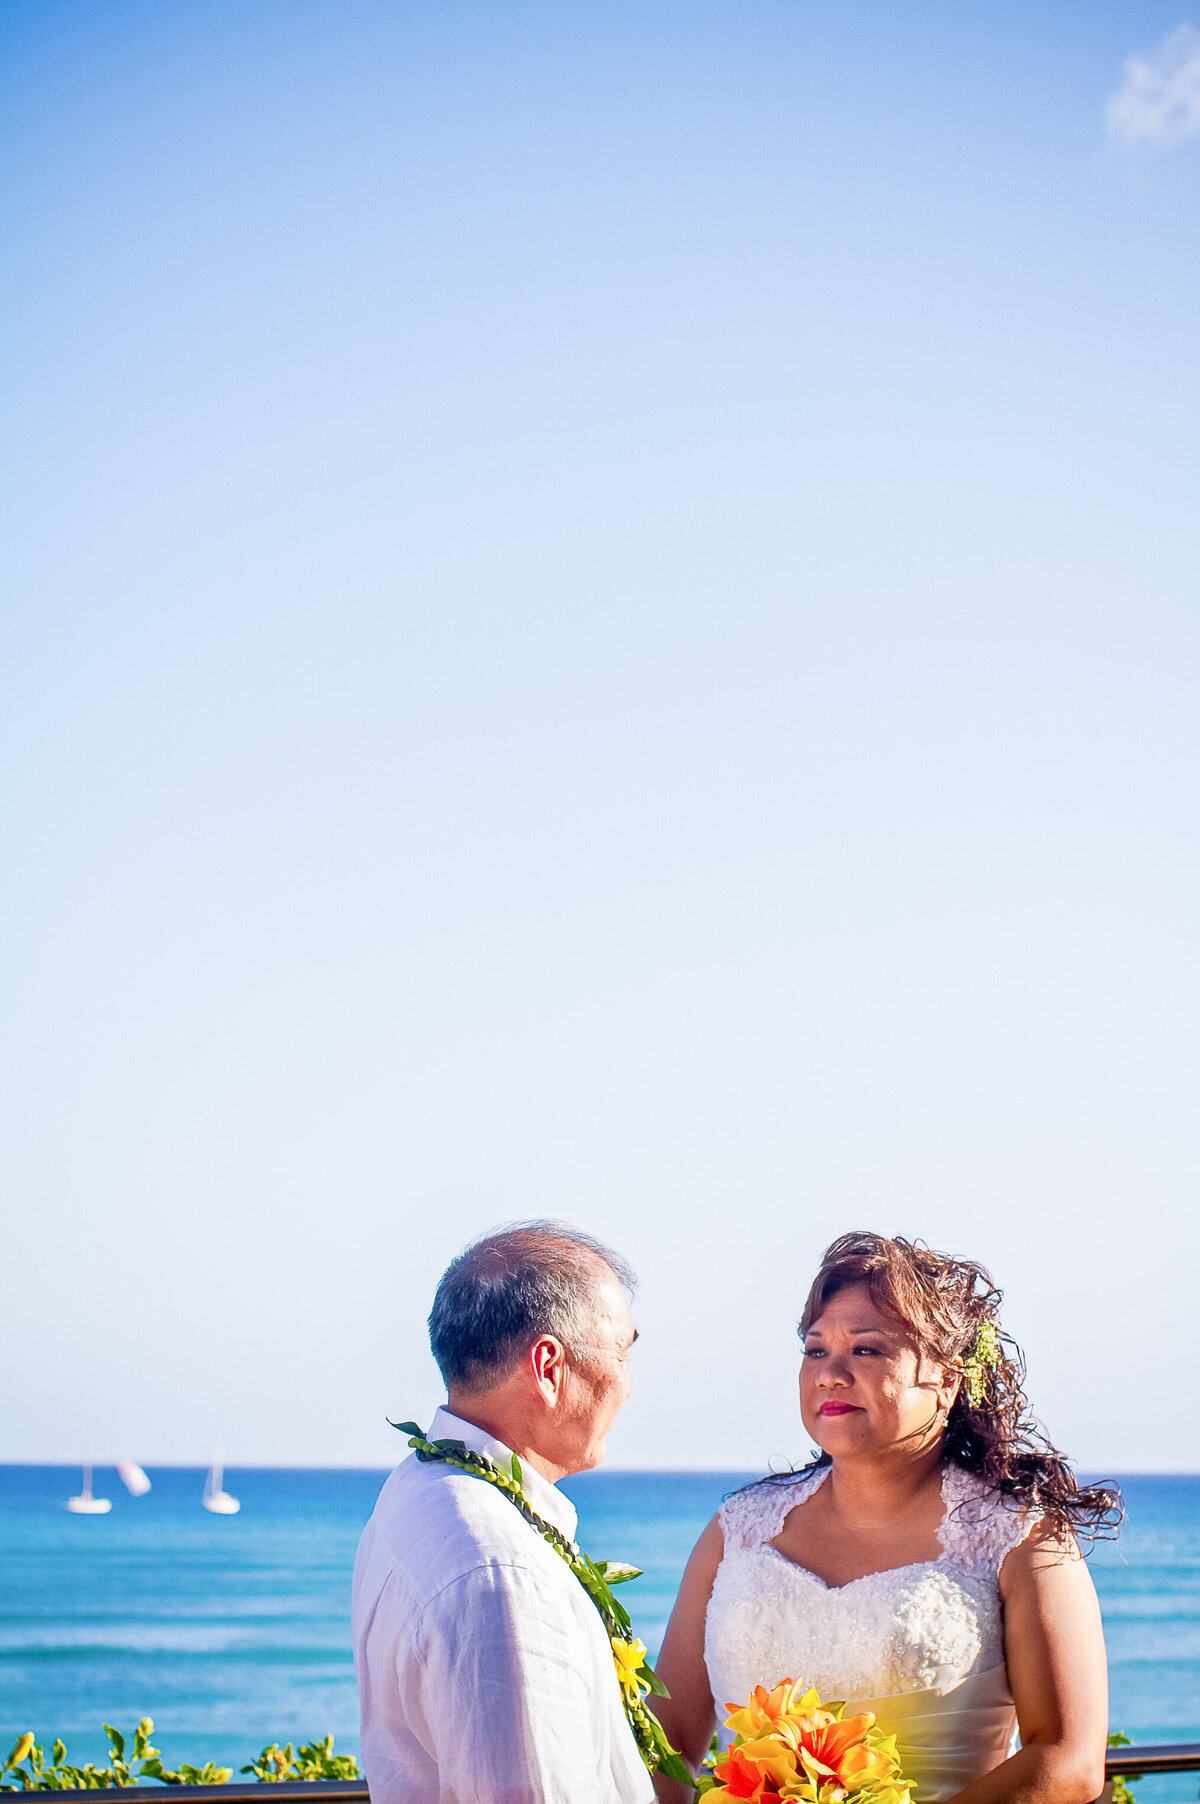 A Bride and Groom Get Married by the Beach